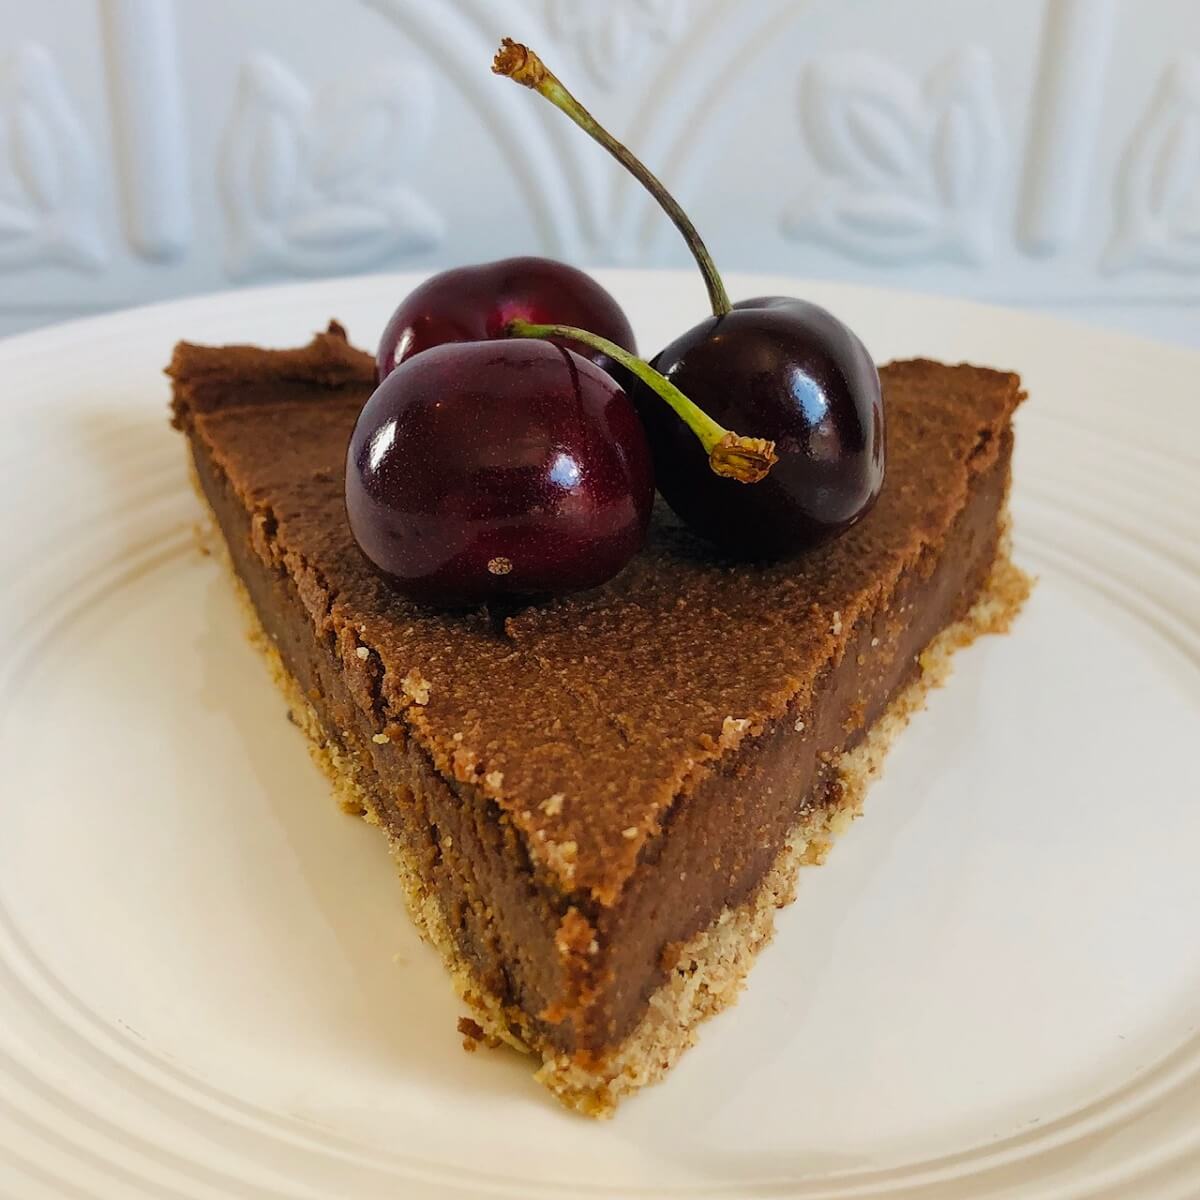 A slice of cheesecake with three cherries on top.